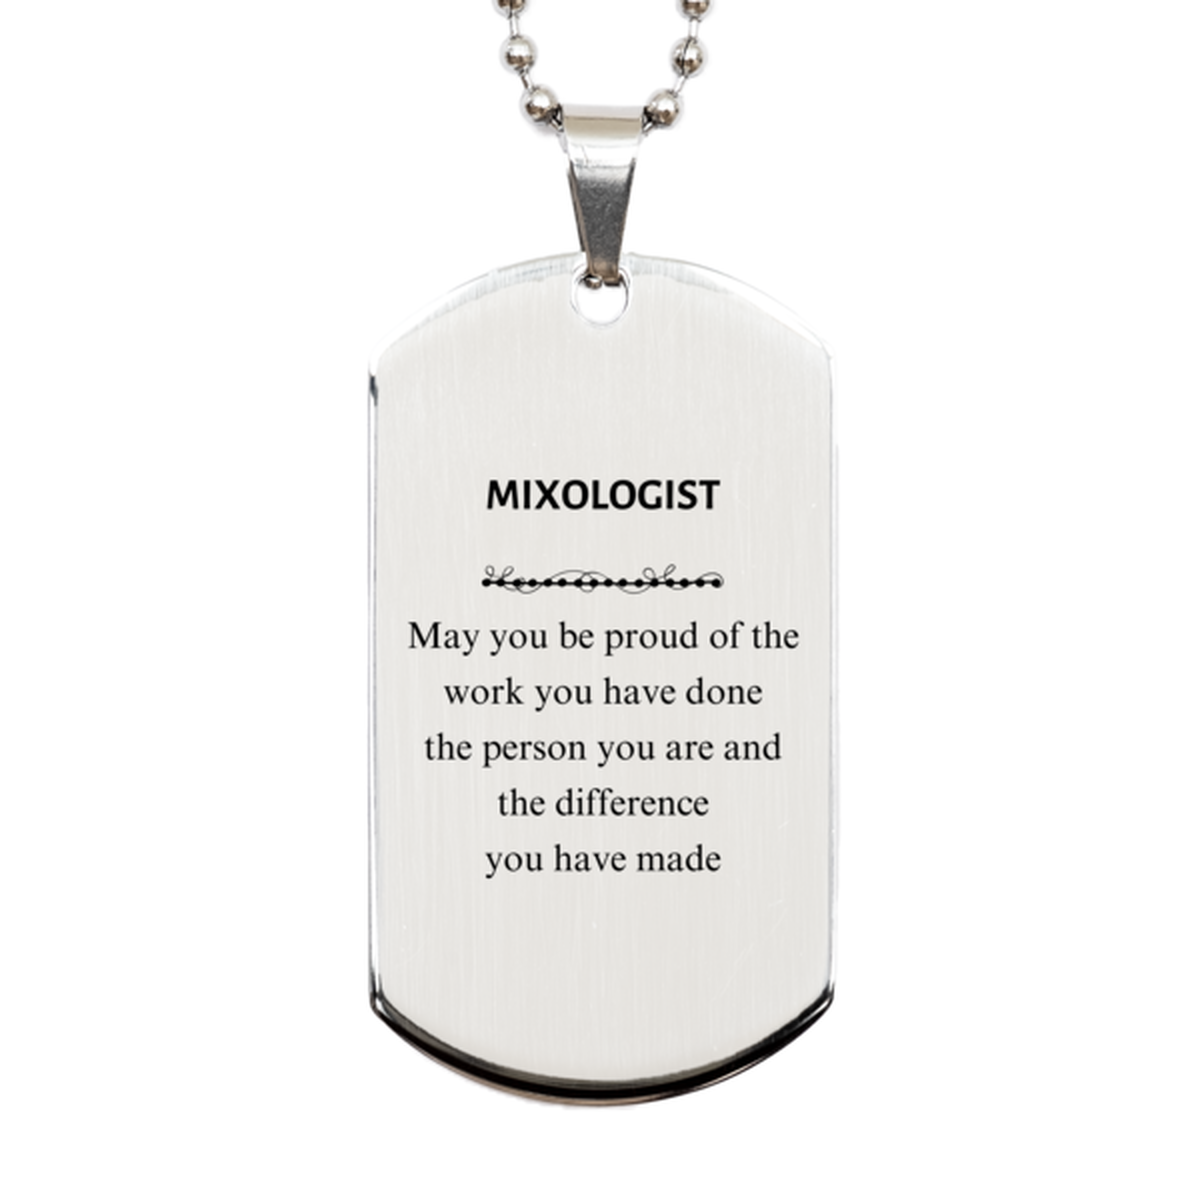 Mixologist May you be proud of the work you have done, Retirement Mixologist Silver Dog Tag for Colleague Appreciation Gifts Amazing for Mixologist